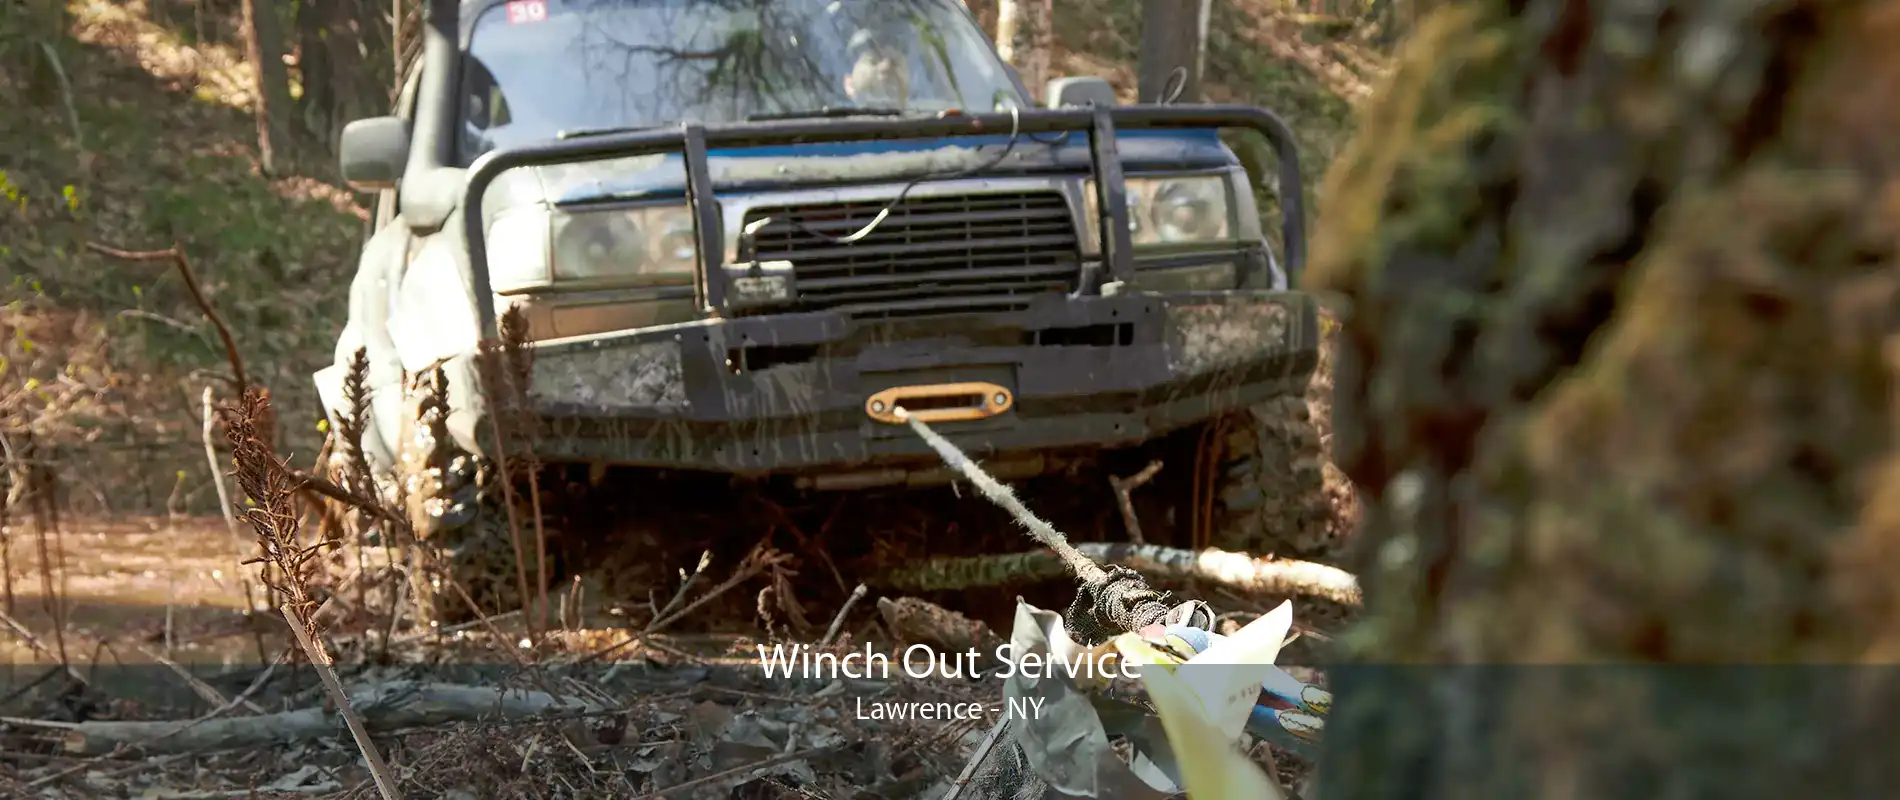 Winch Out Service Lawrence - NY